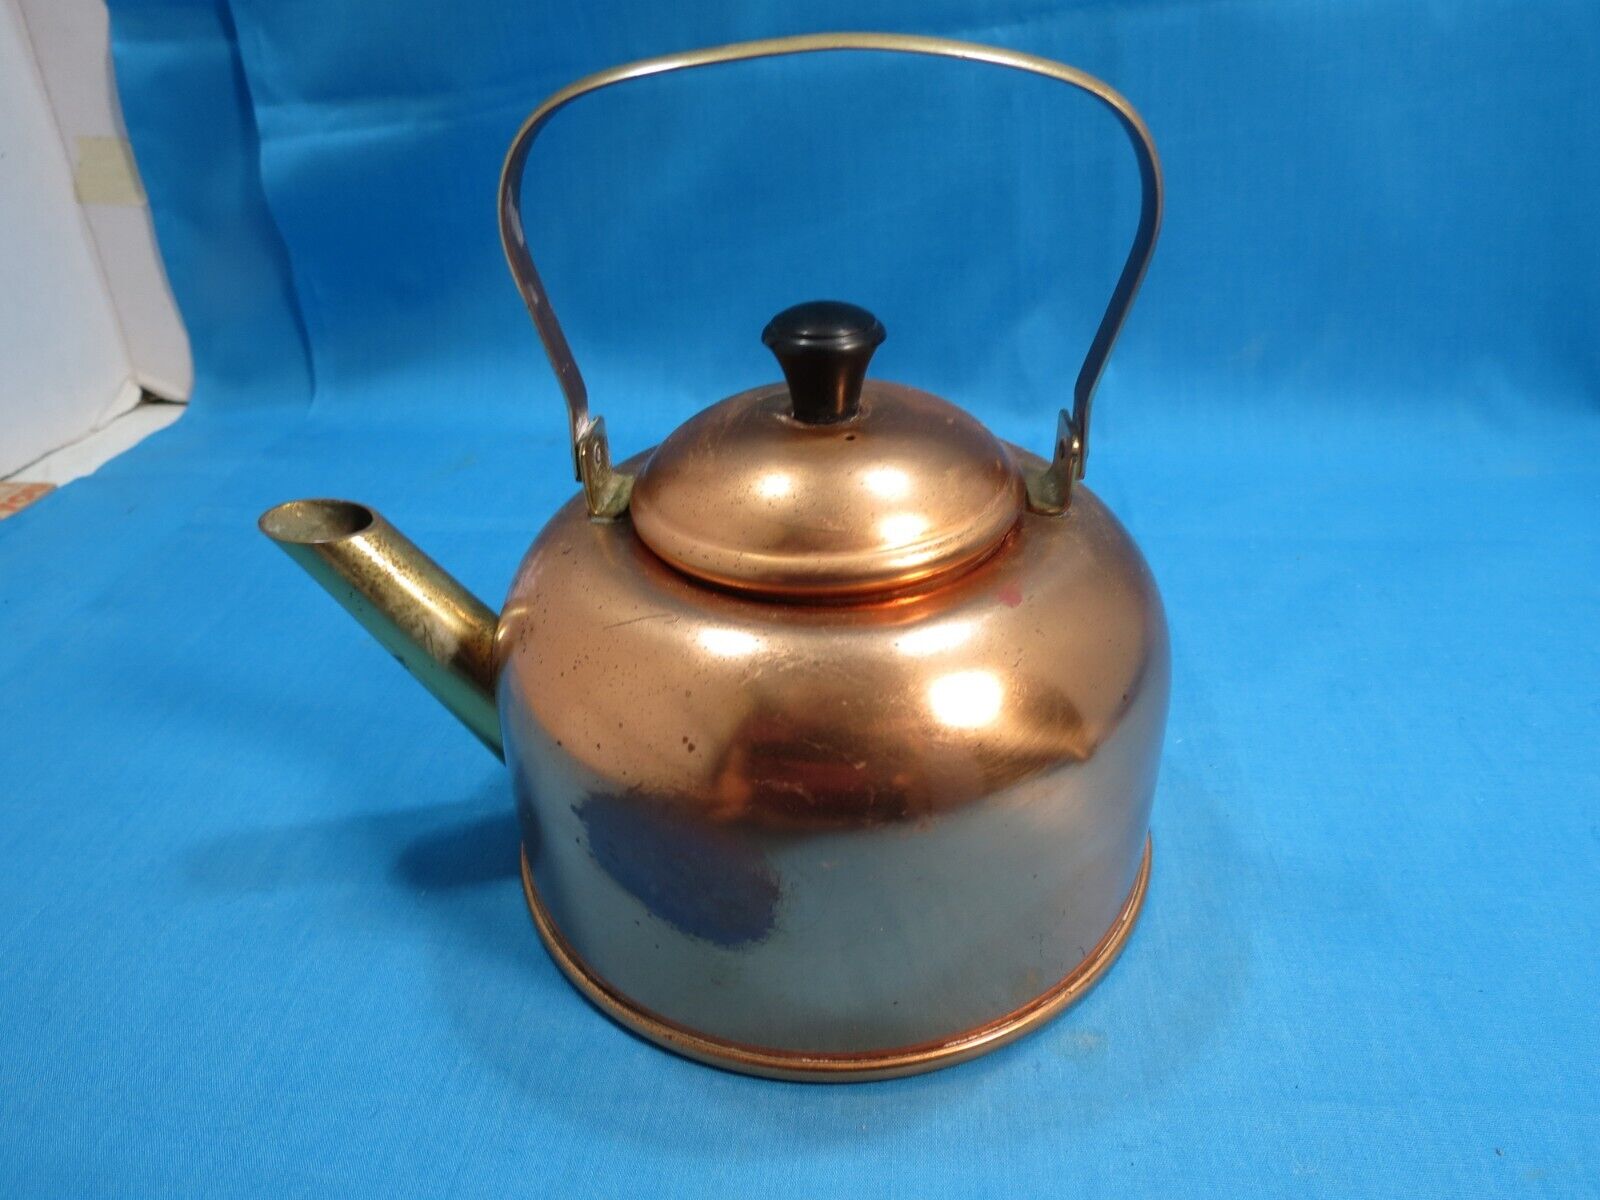 Amazing Antique Copper Kettle Copper Craft Guild USA Mid Century Modern 2 CUP